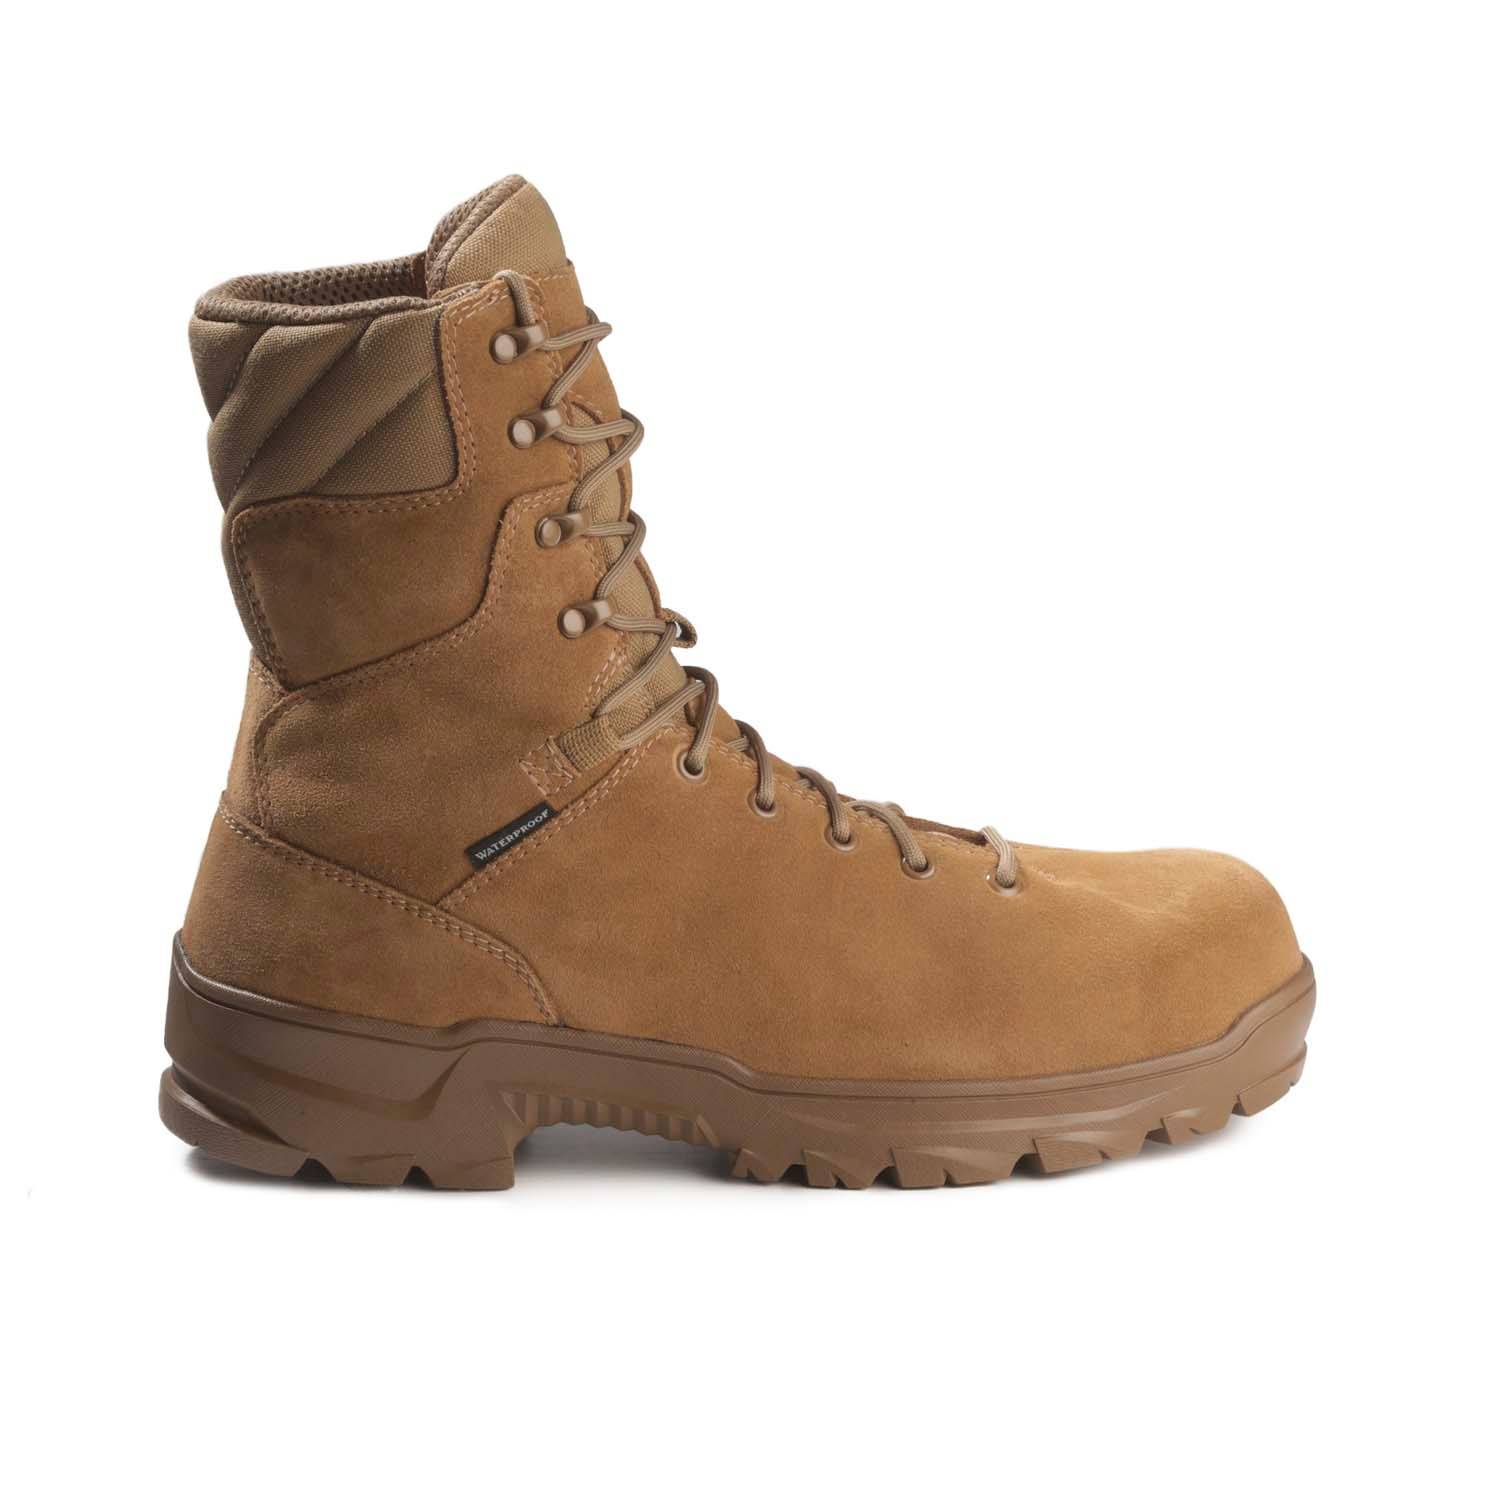 Belleville Squall Military Boots